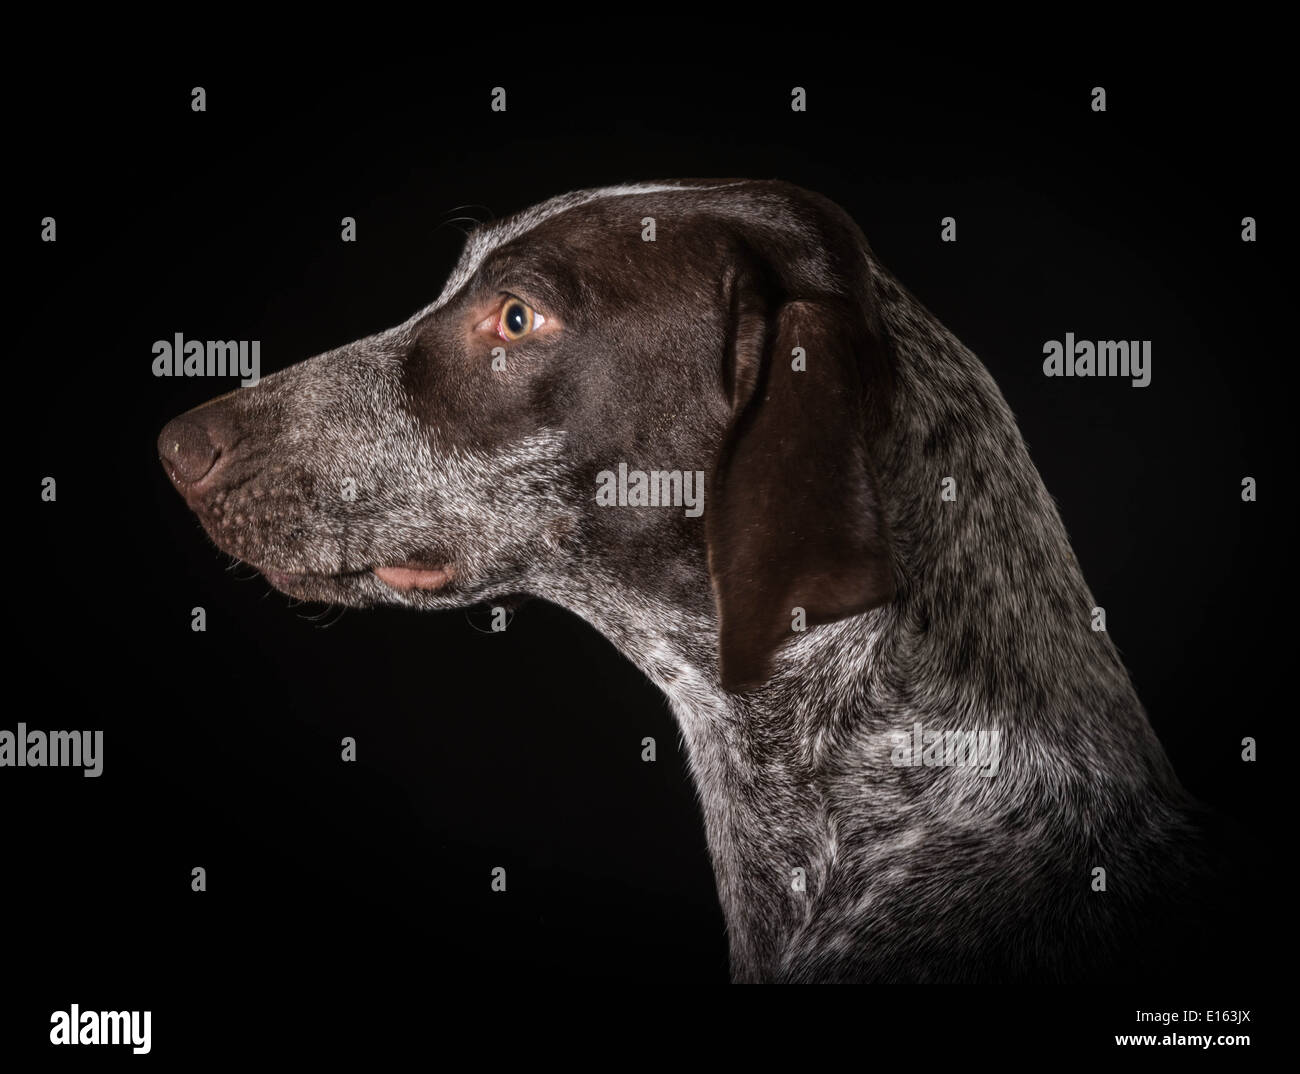 german shorthaired pointer head profile on black background Stock Photo